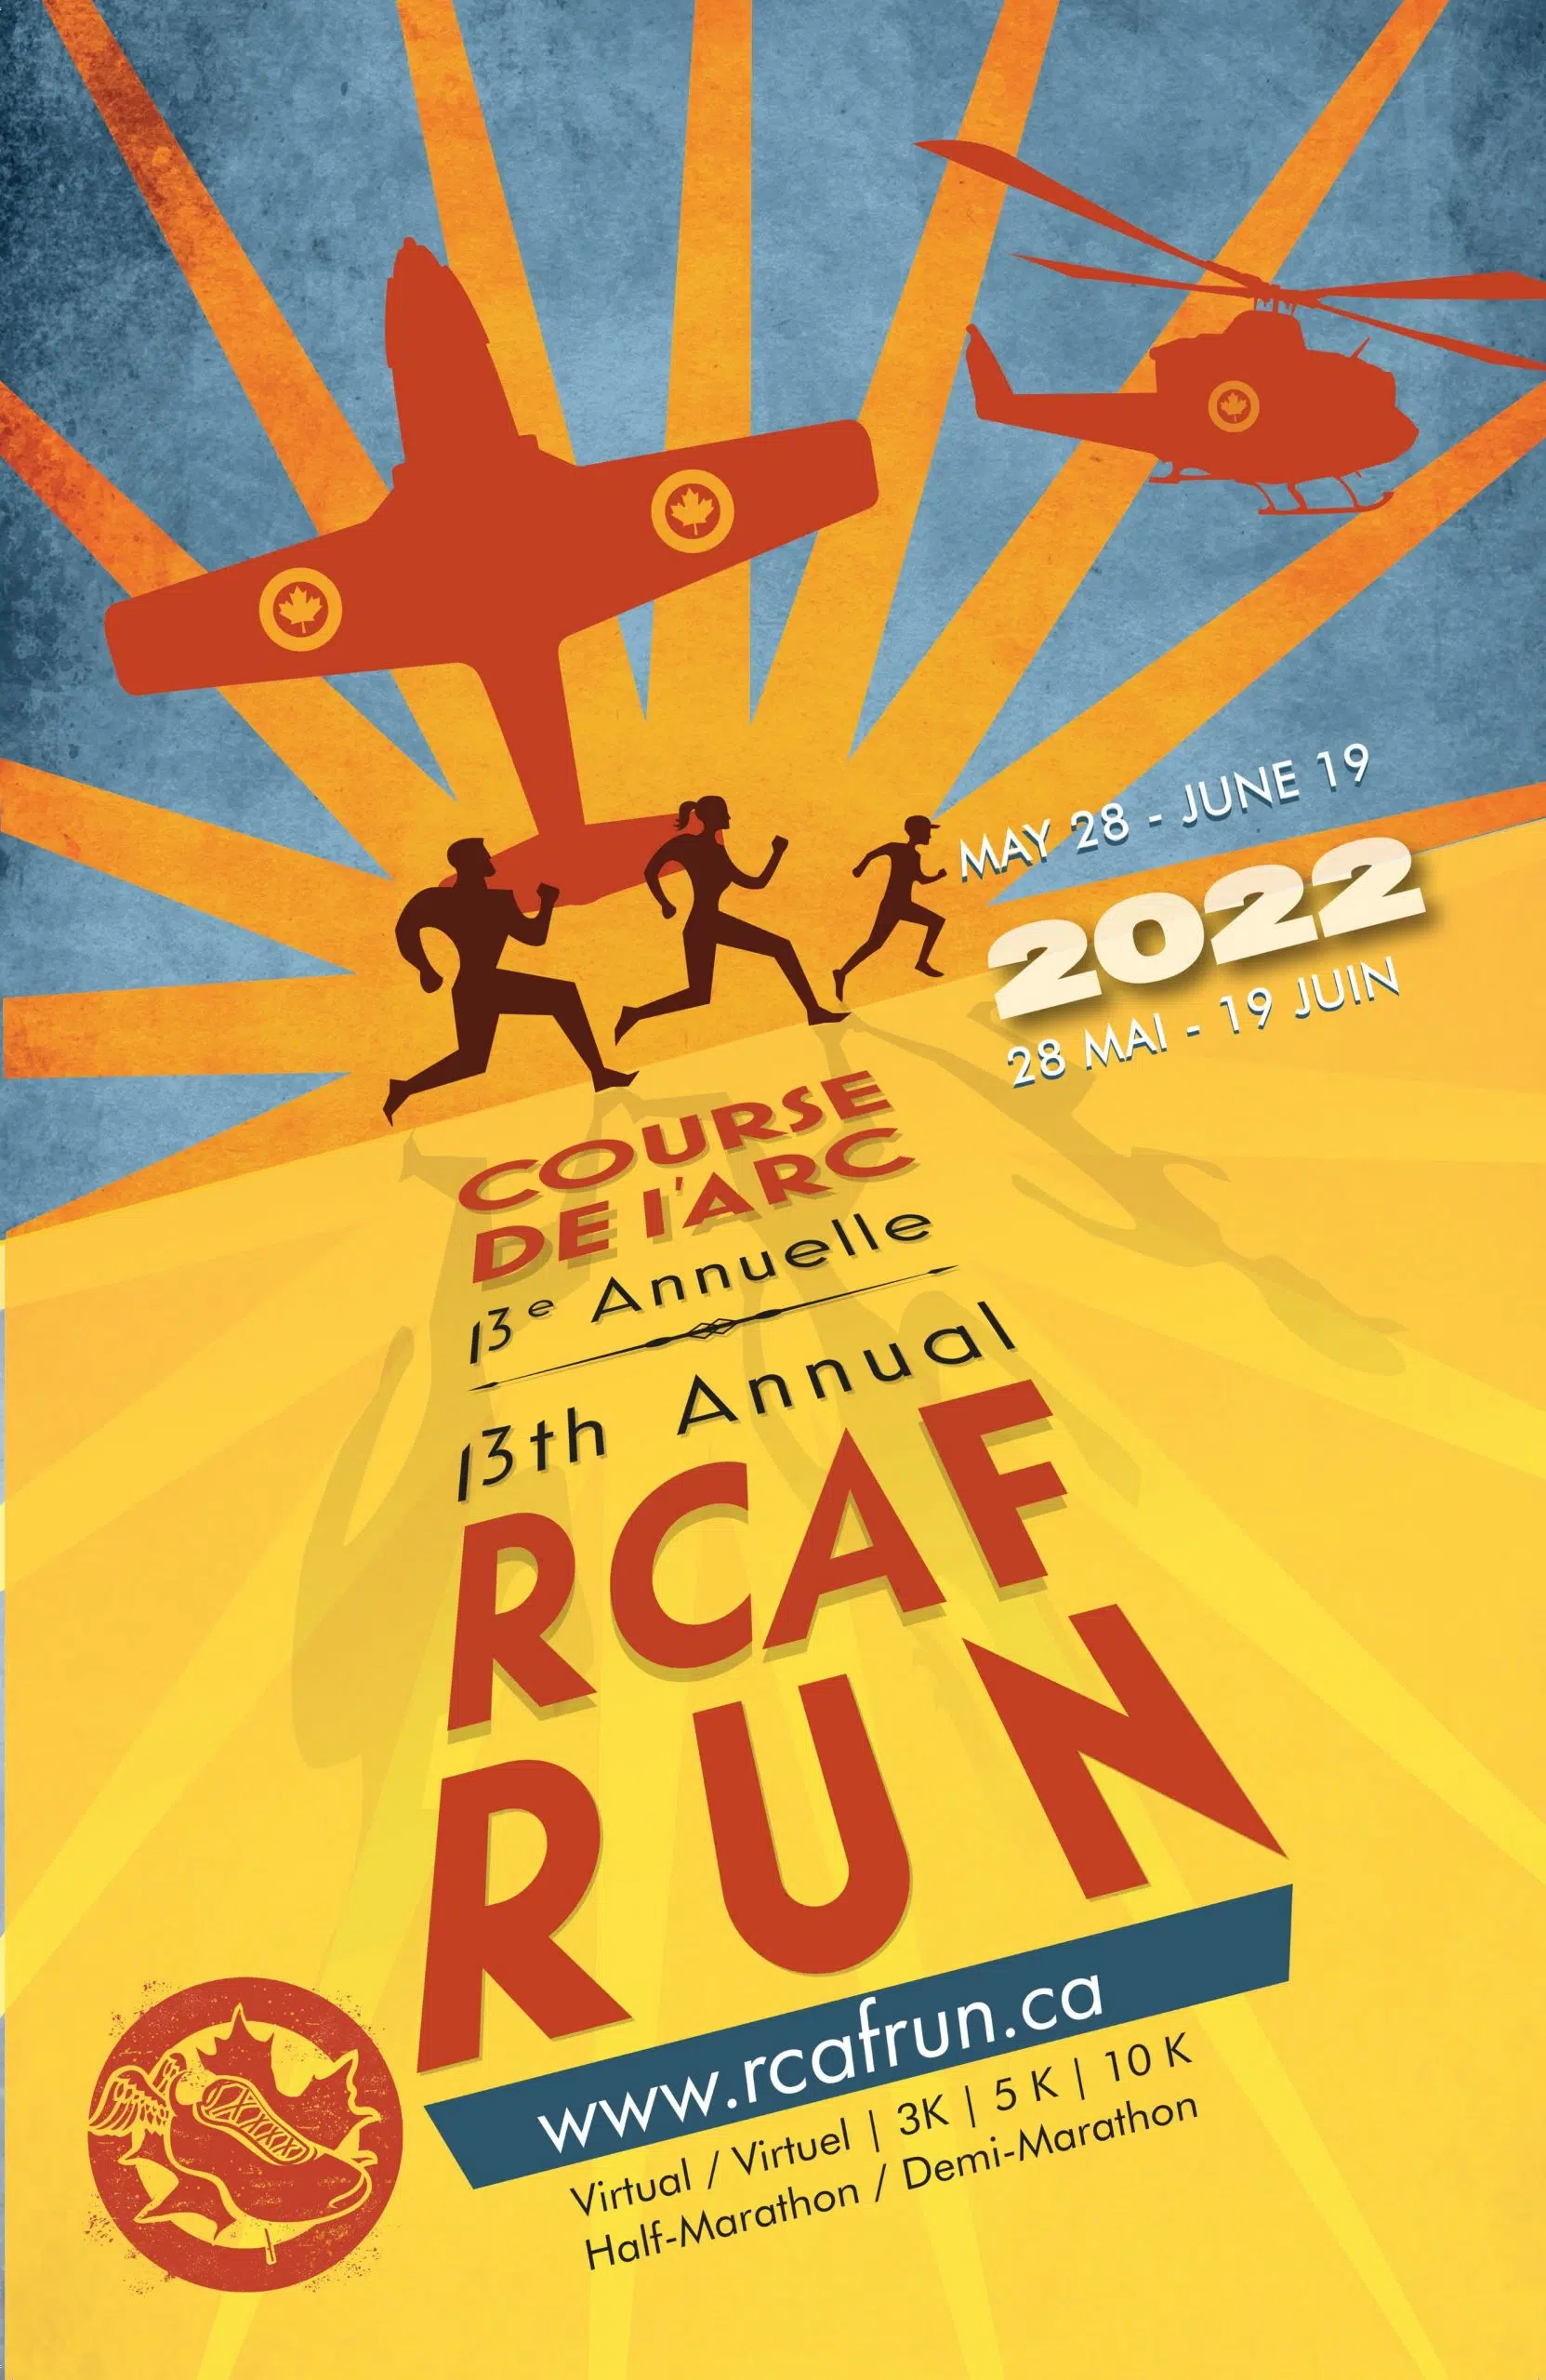 RCAF Run open to all